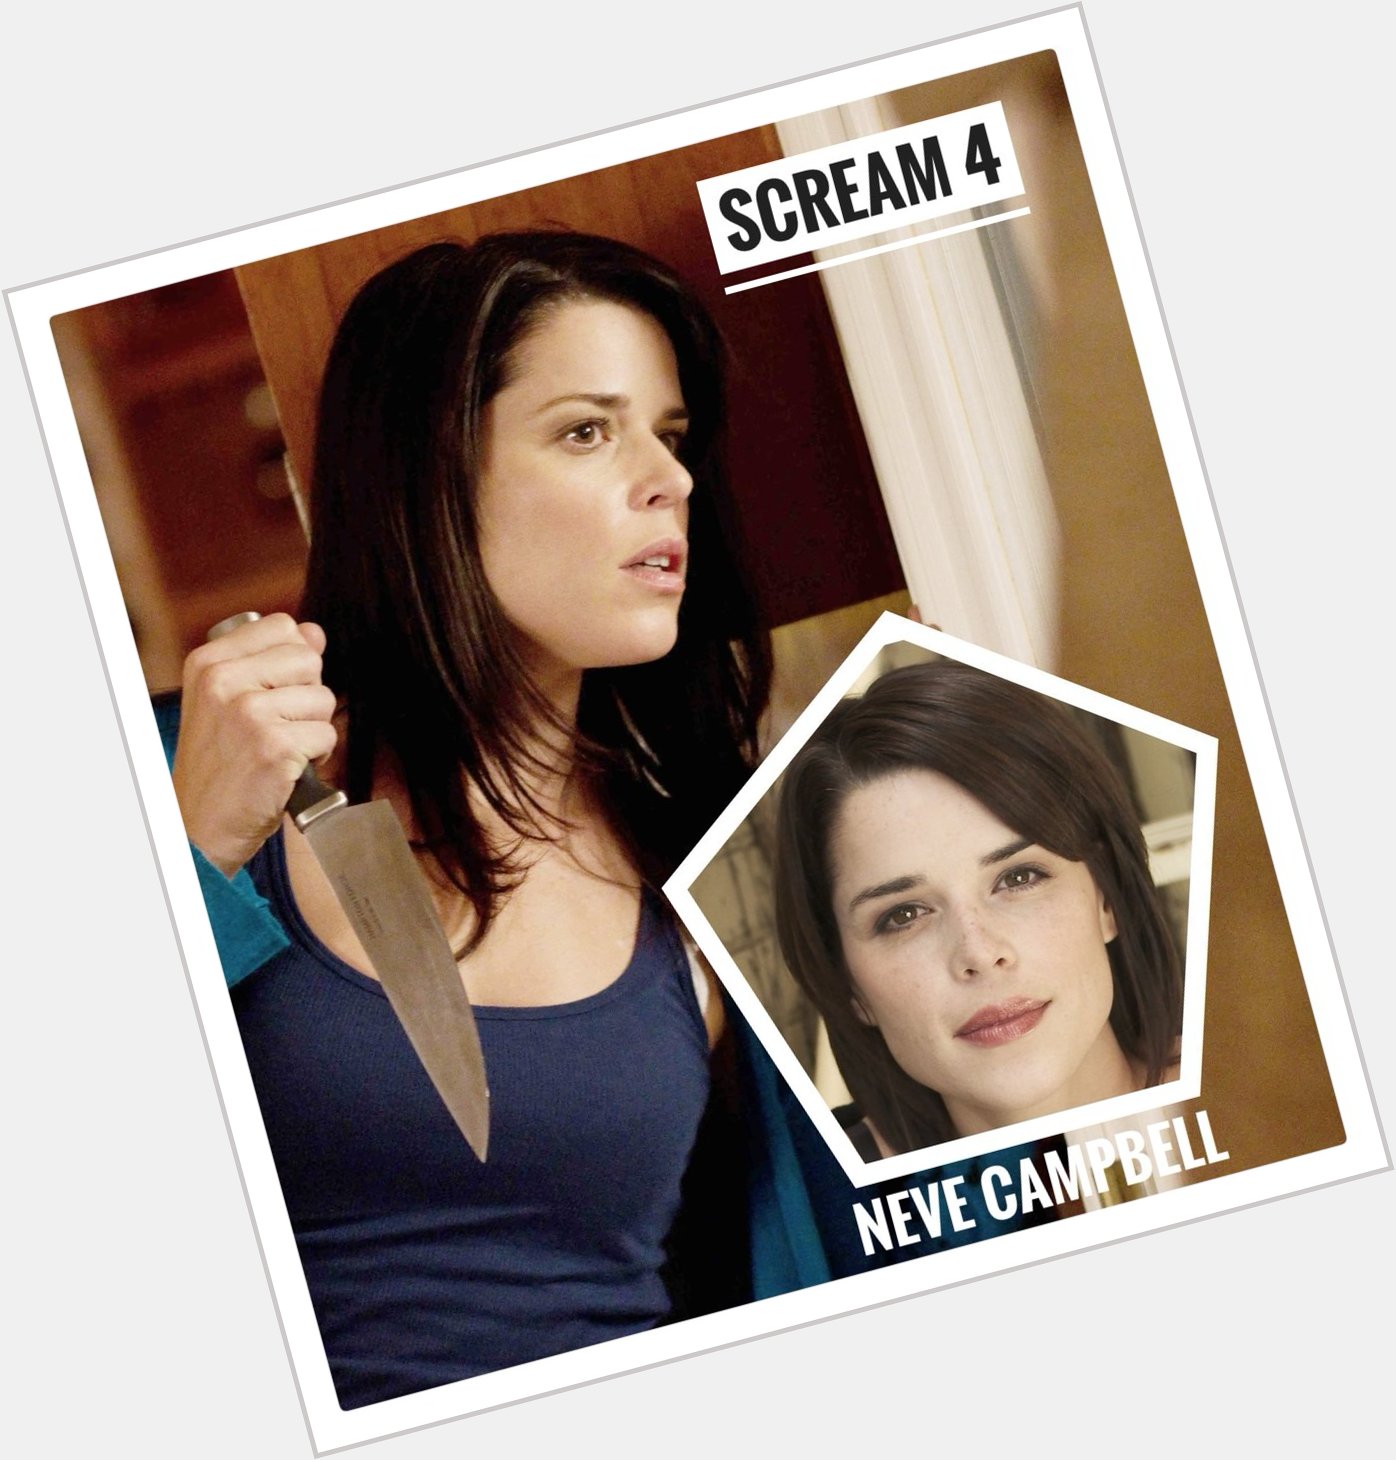 Neve Campbell was born on this day happy birthday 